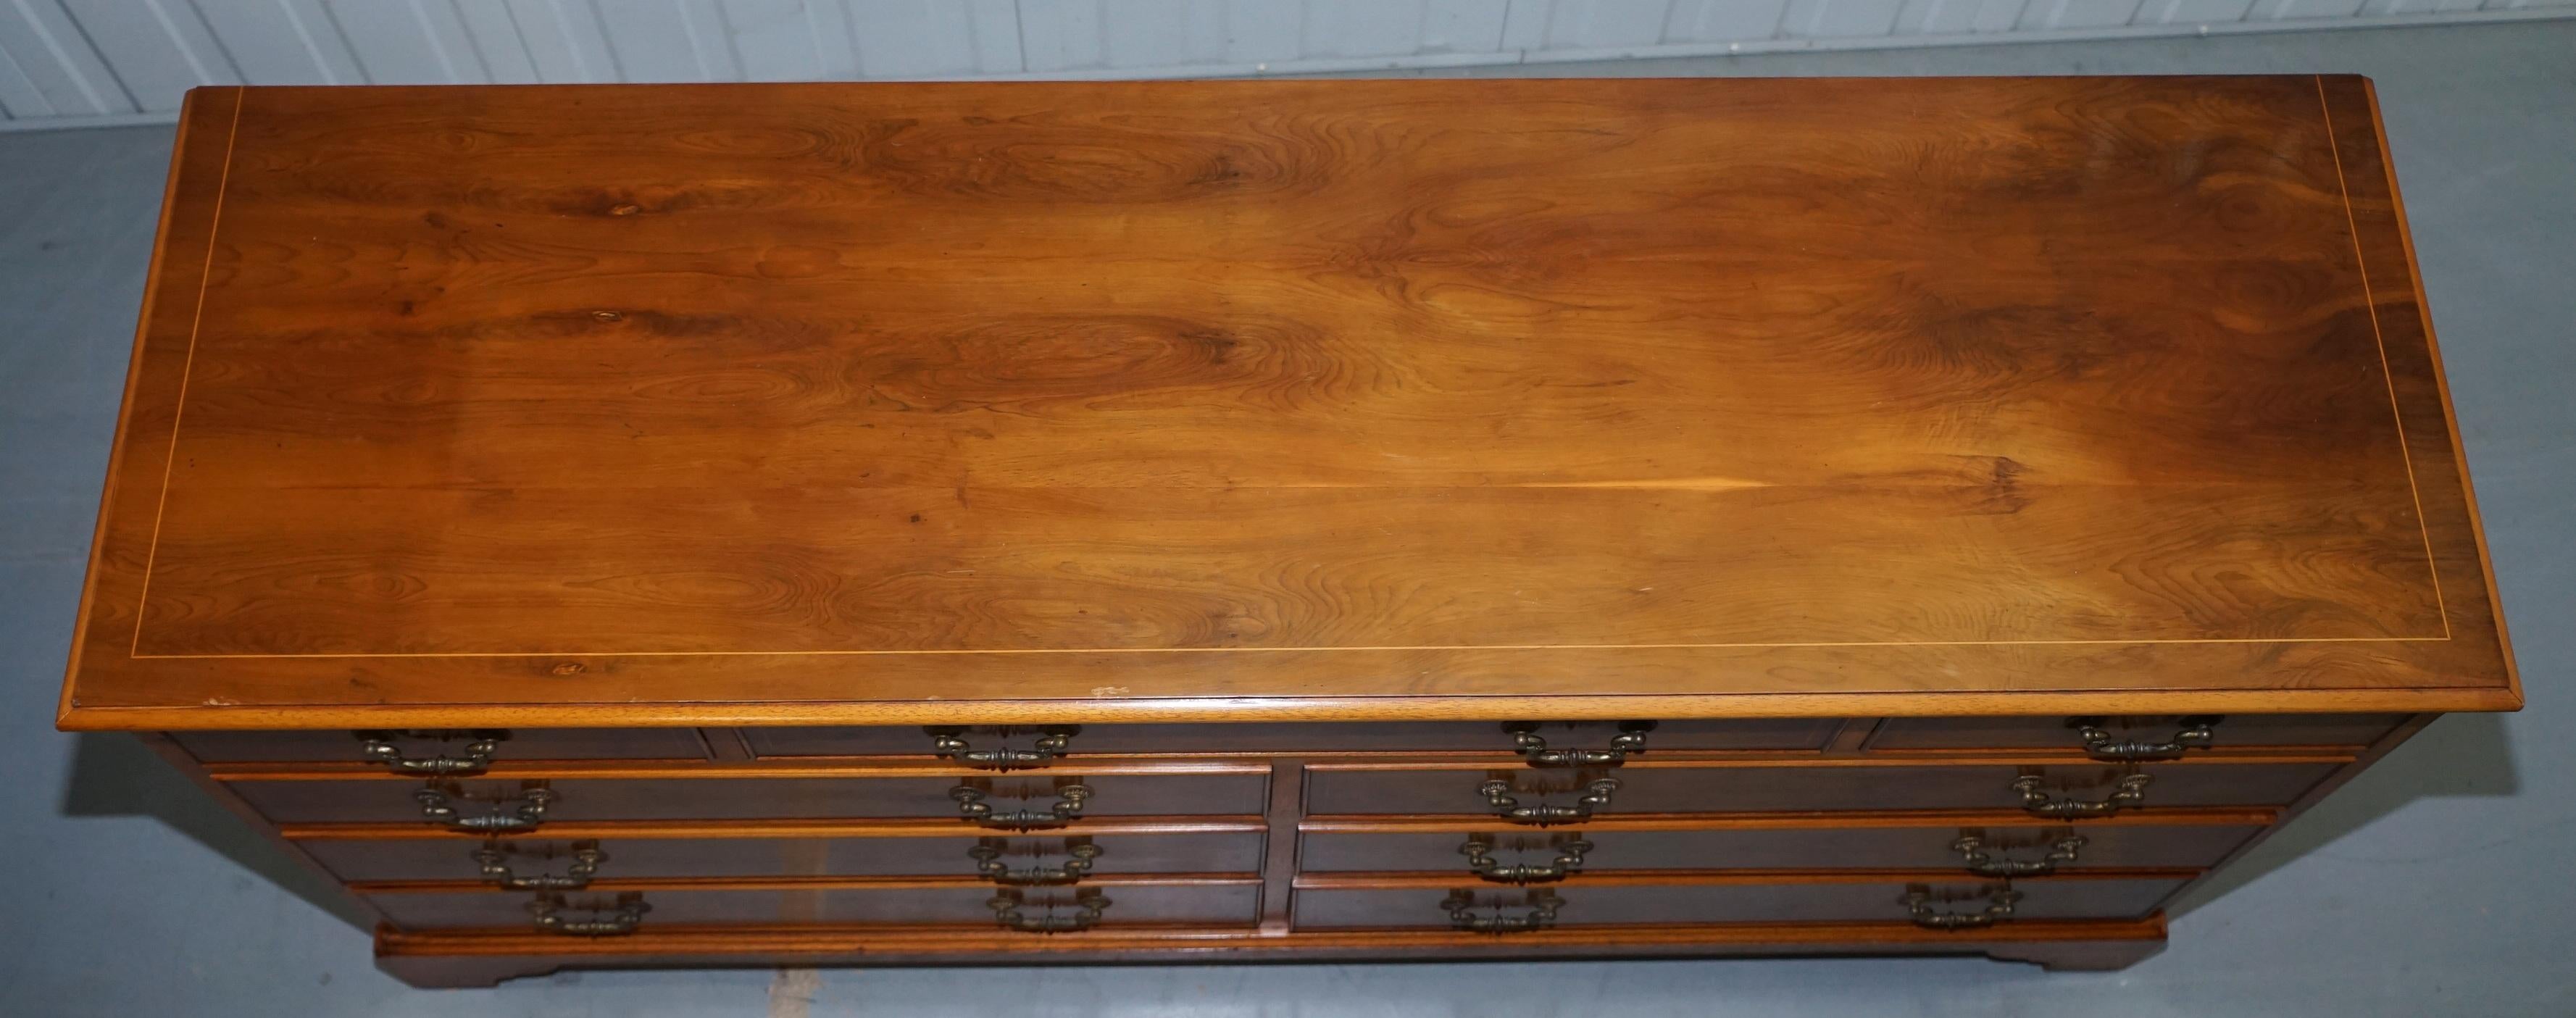 Modern Vintage Burr Yew Wood Large Sideboard Bank of Drawers Campaign Style, England